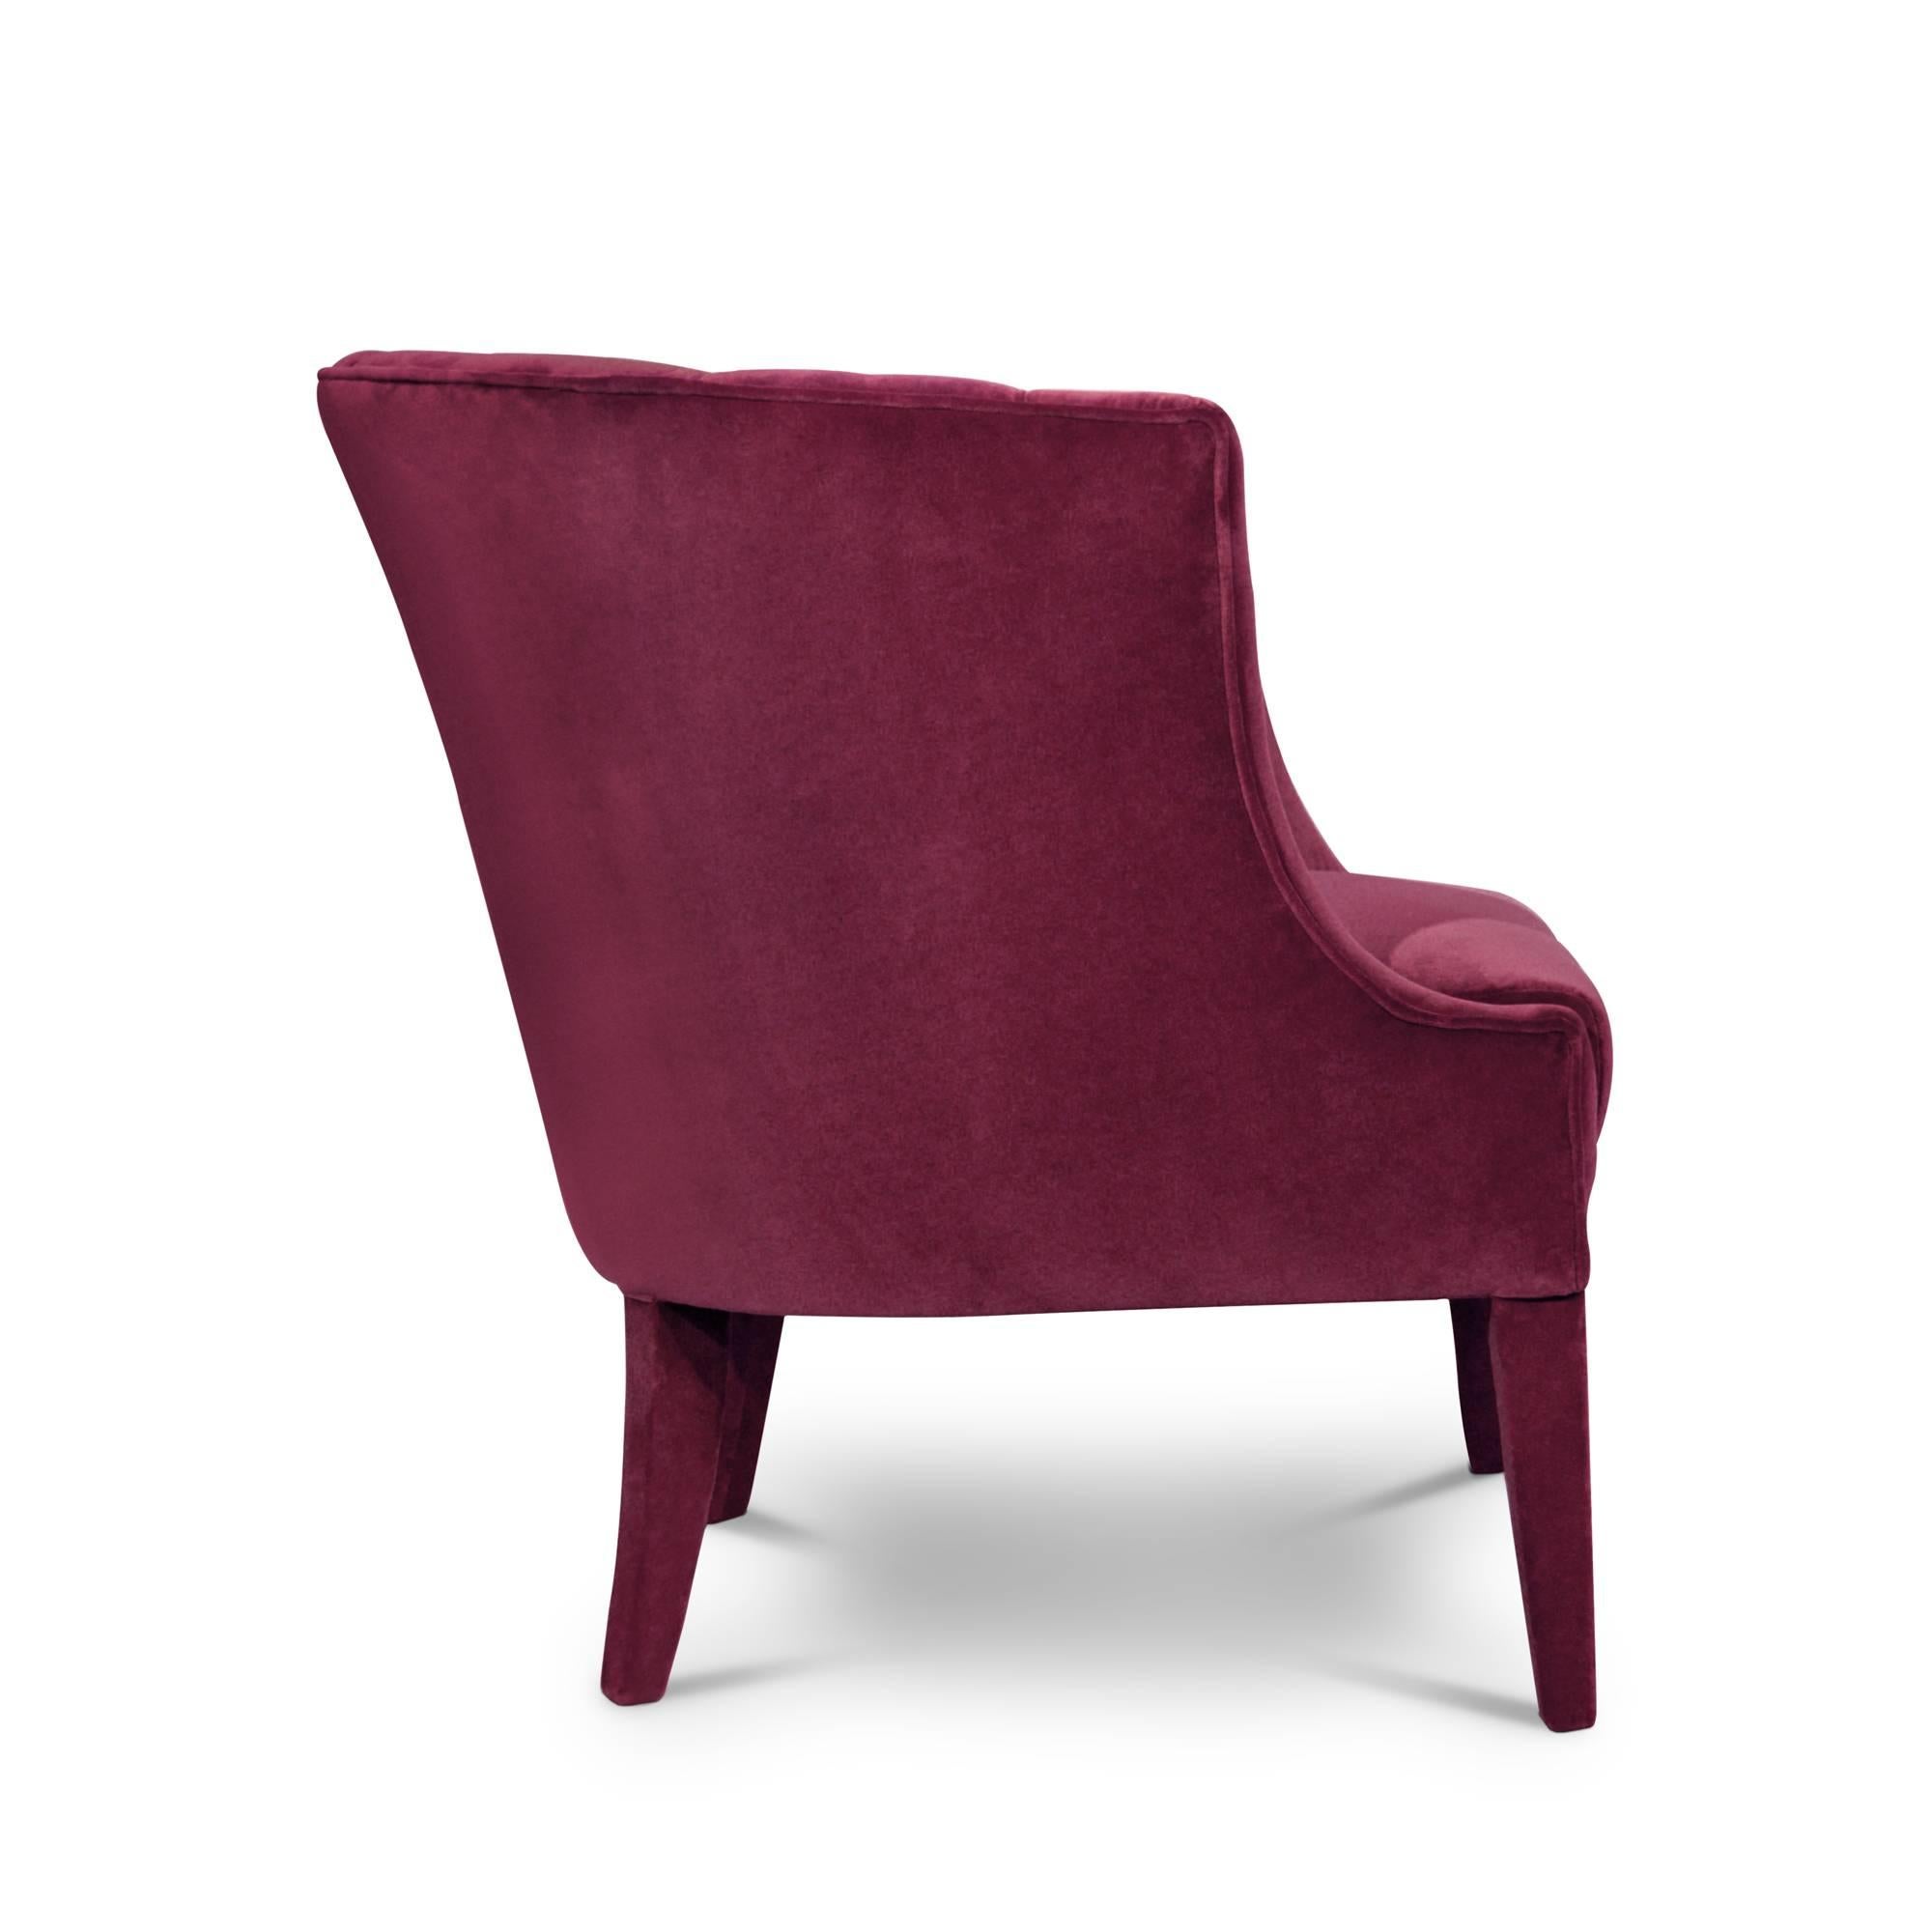 Armchair Camilla in cotton velvet fabric
and fully upholstered.
